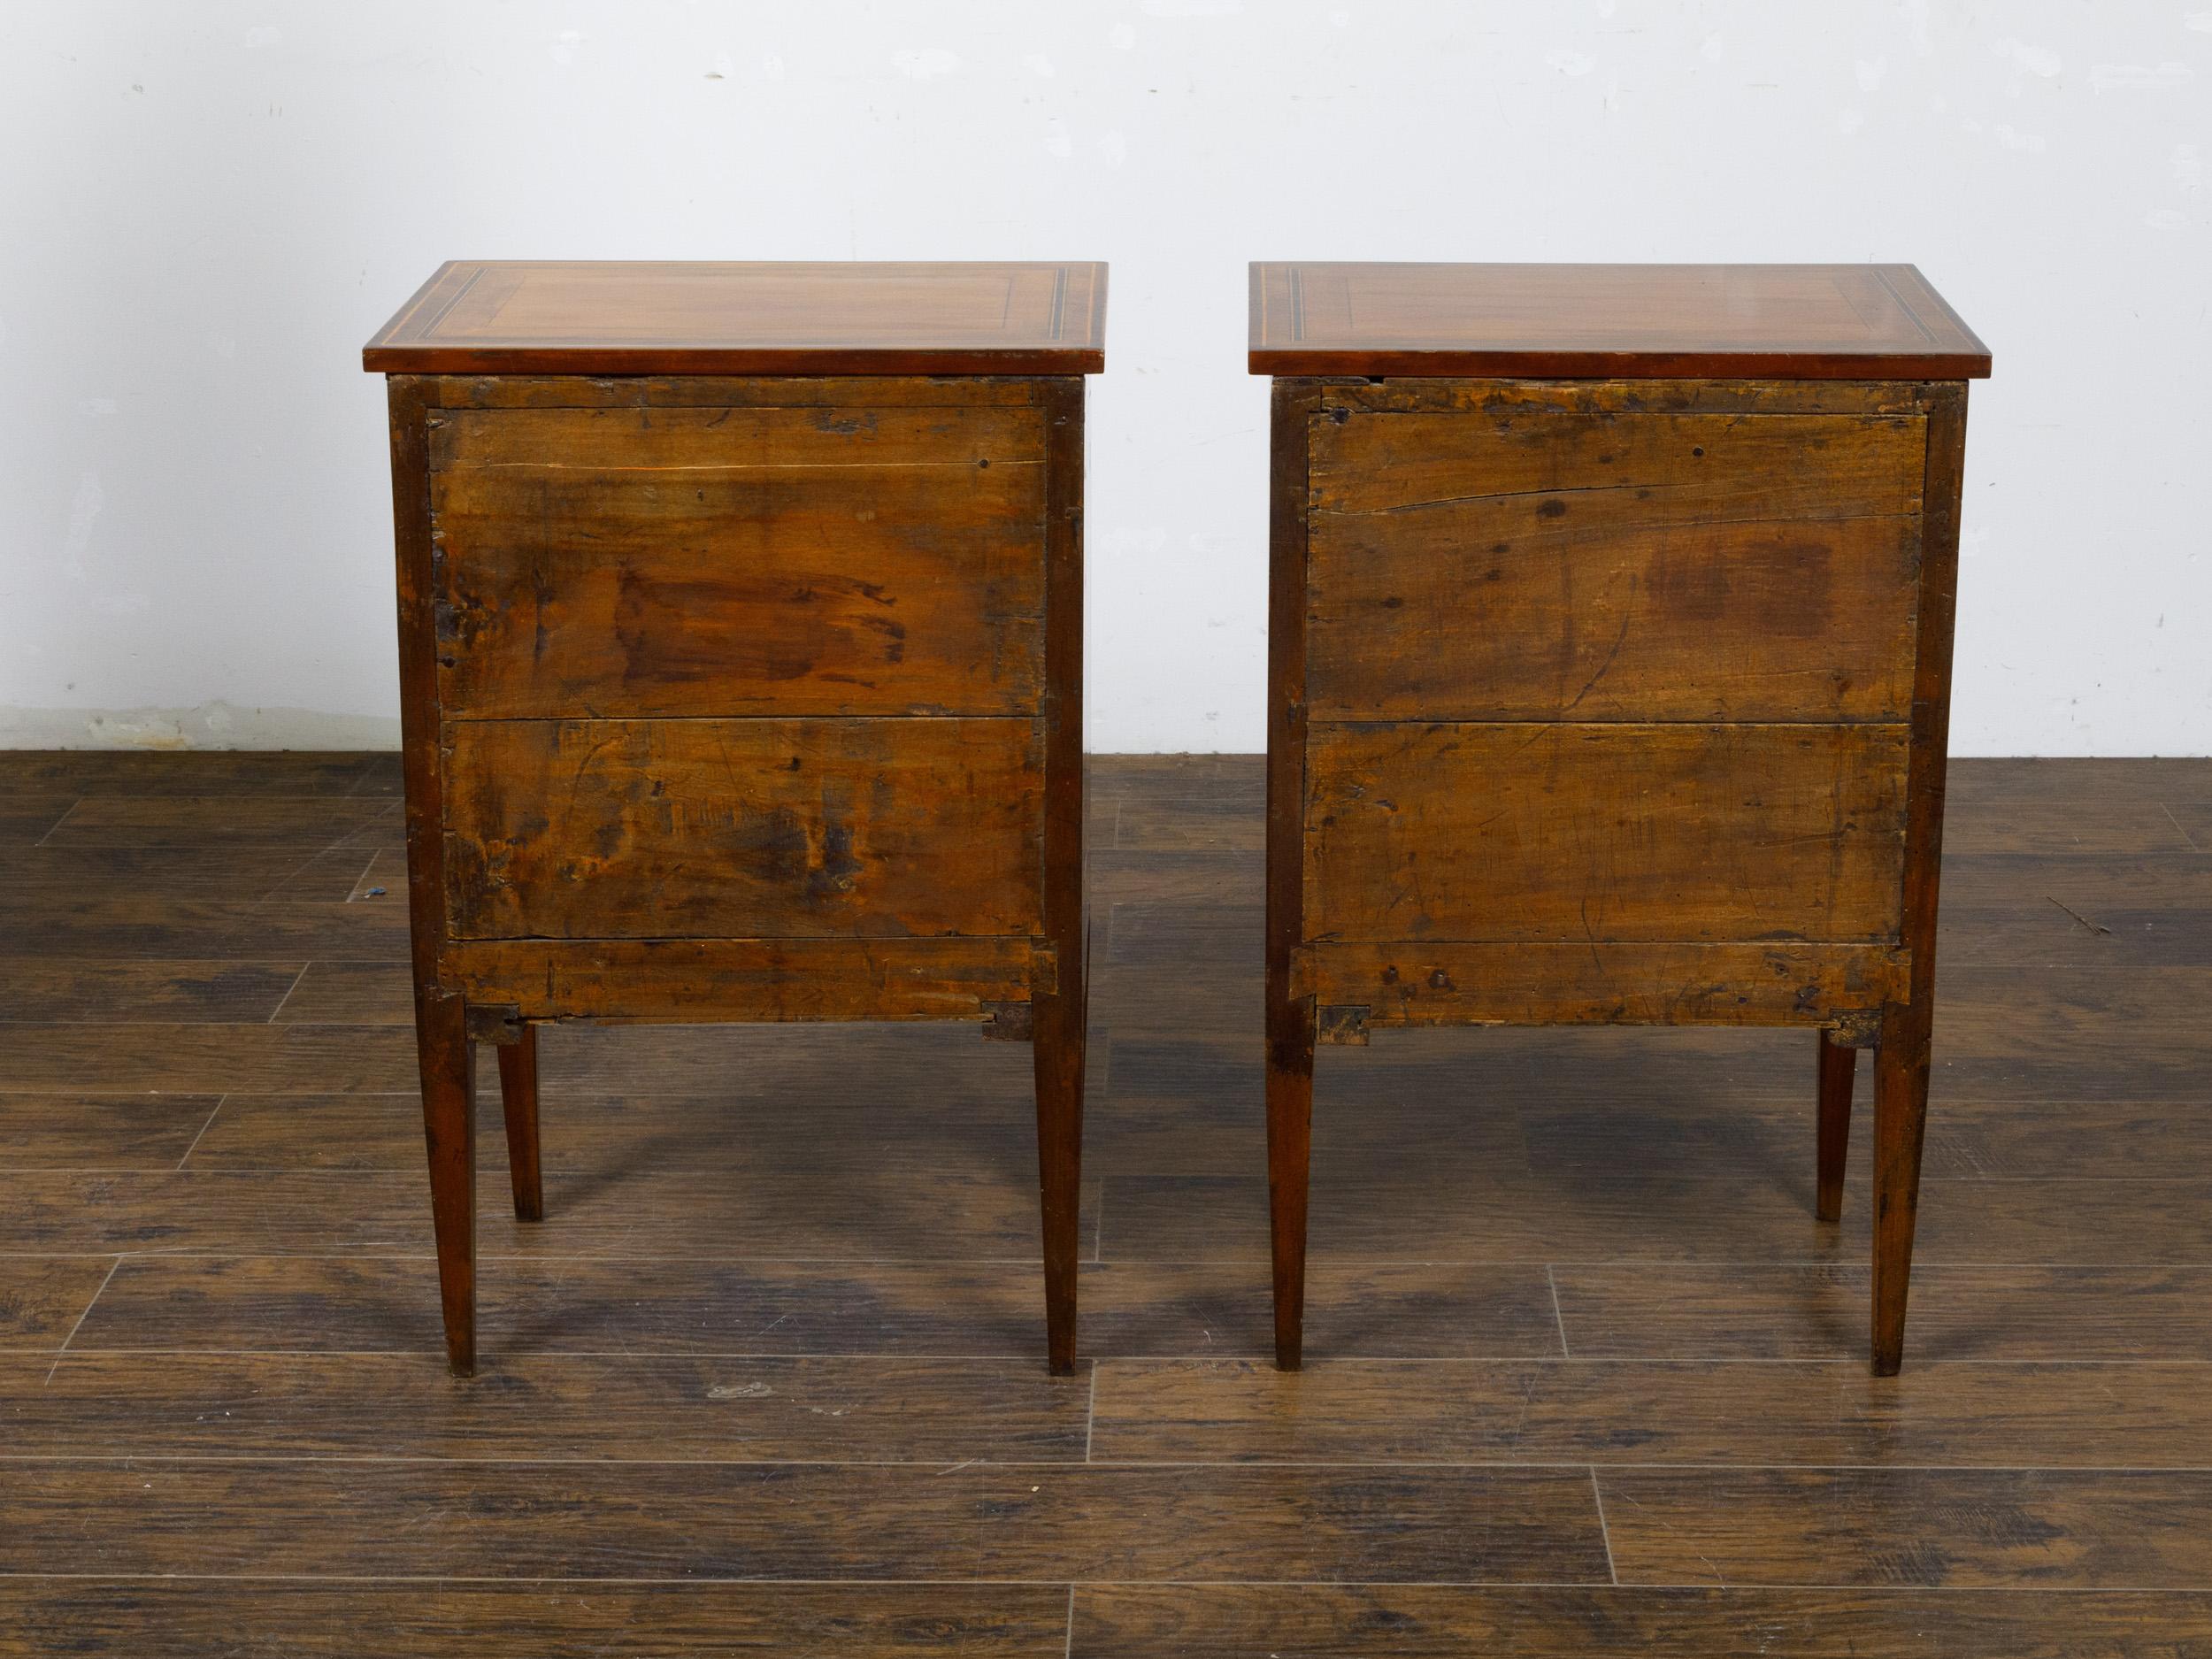 Pair of Italian Neoclassical 1800s Walnut Bedside Tables with Marquetry Décor In Good Condition For Sale In Atlanta, GA